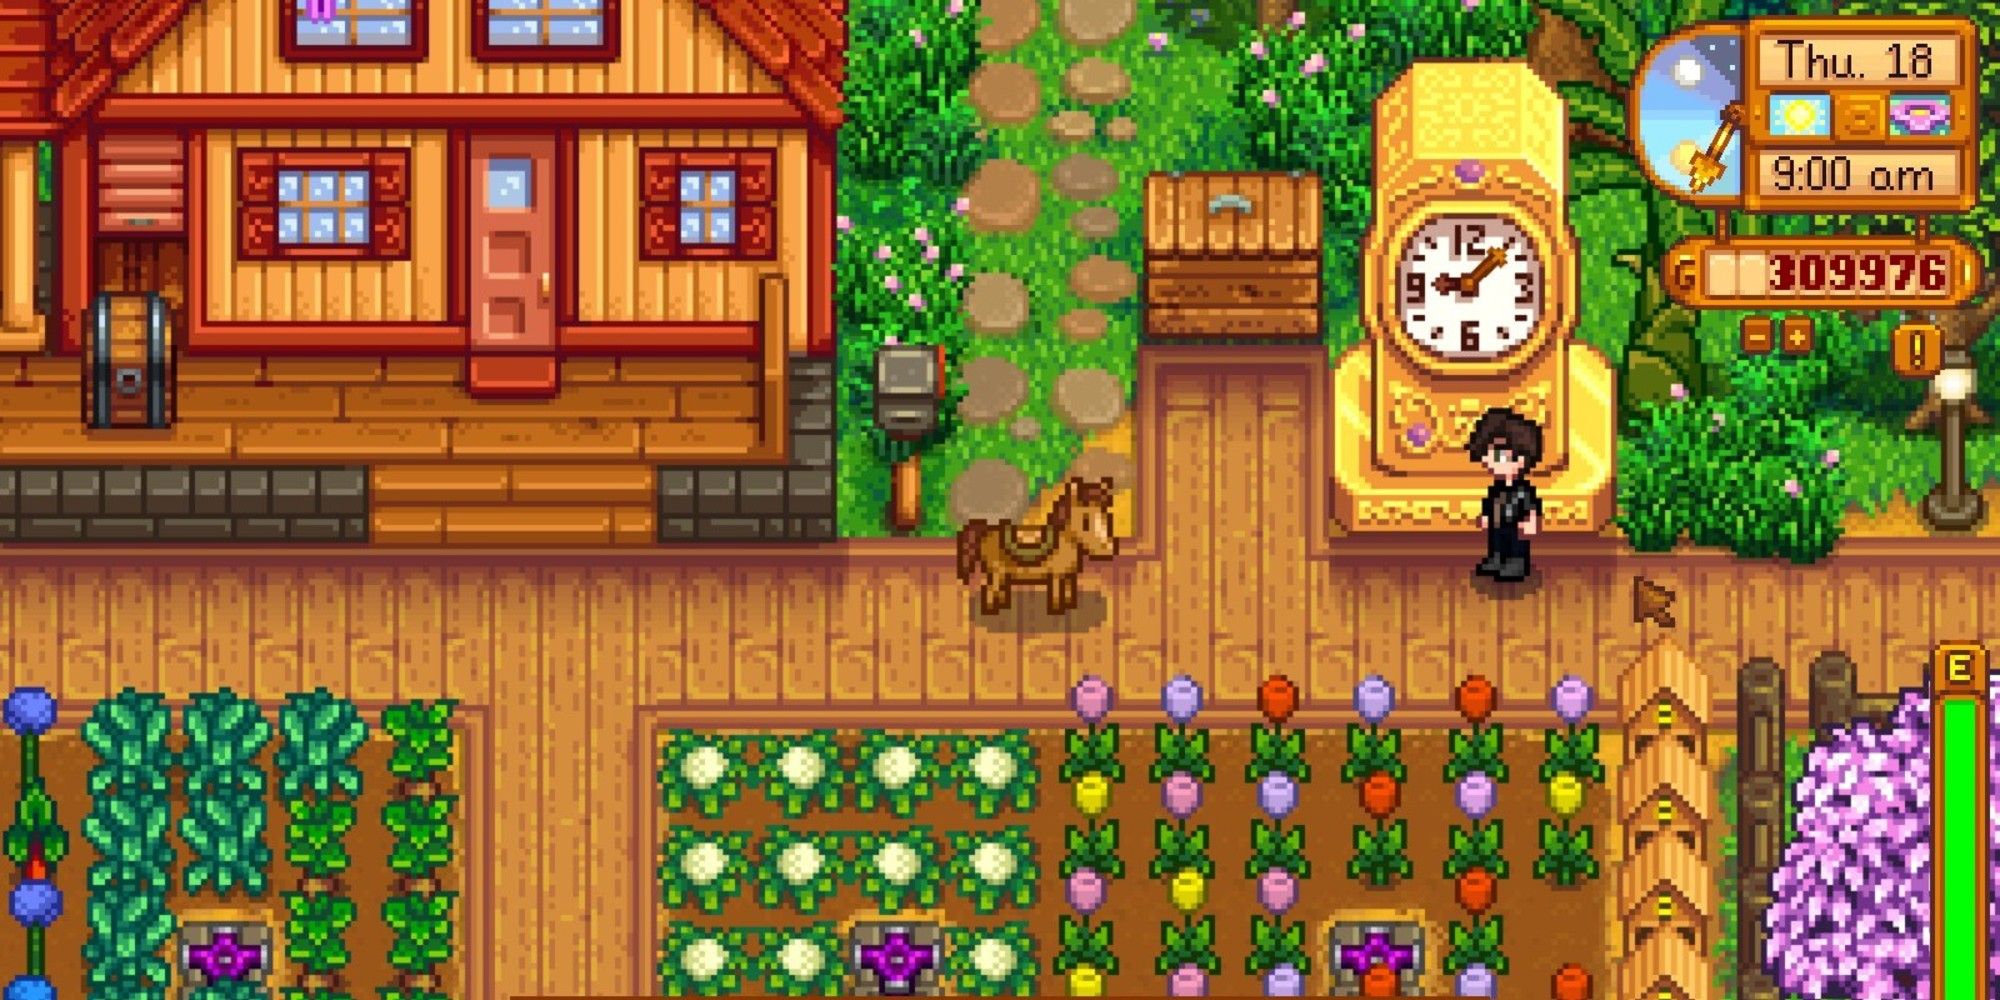 player and horse standing next to golden clock on farm